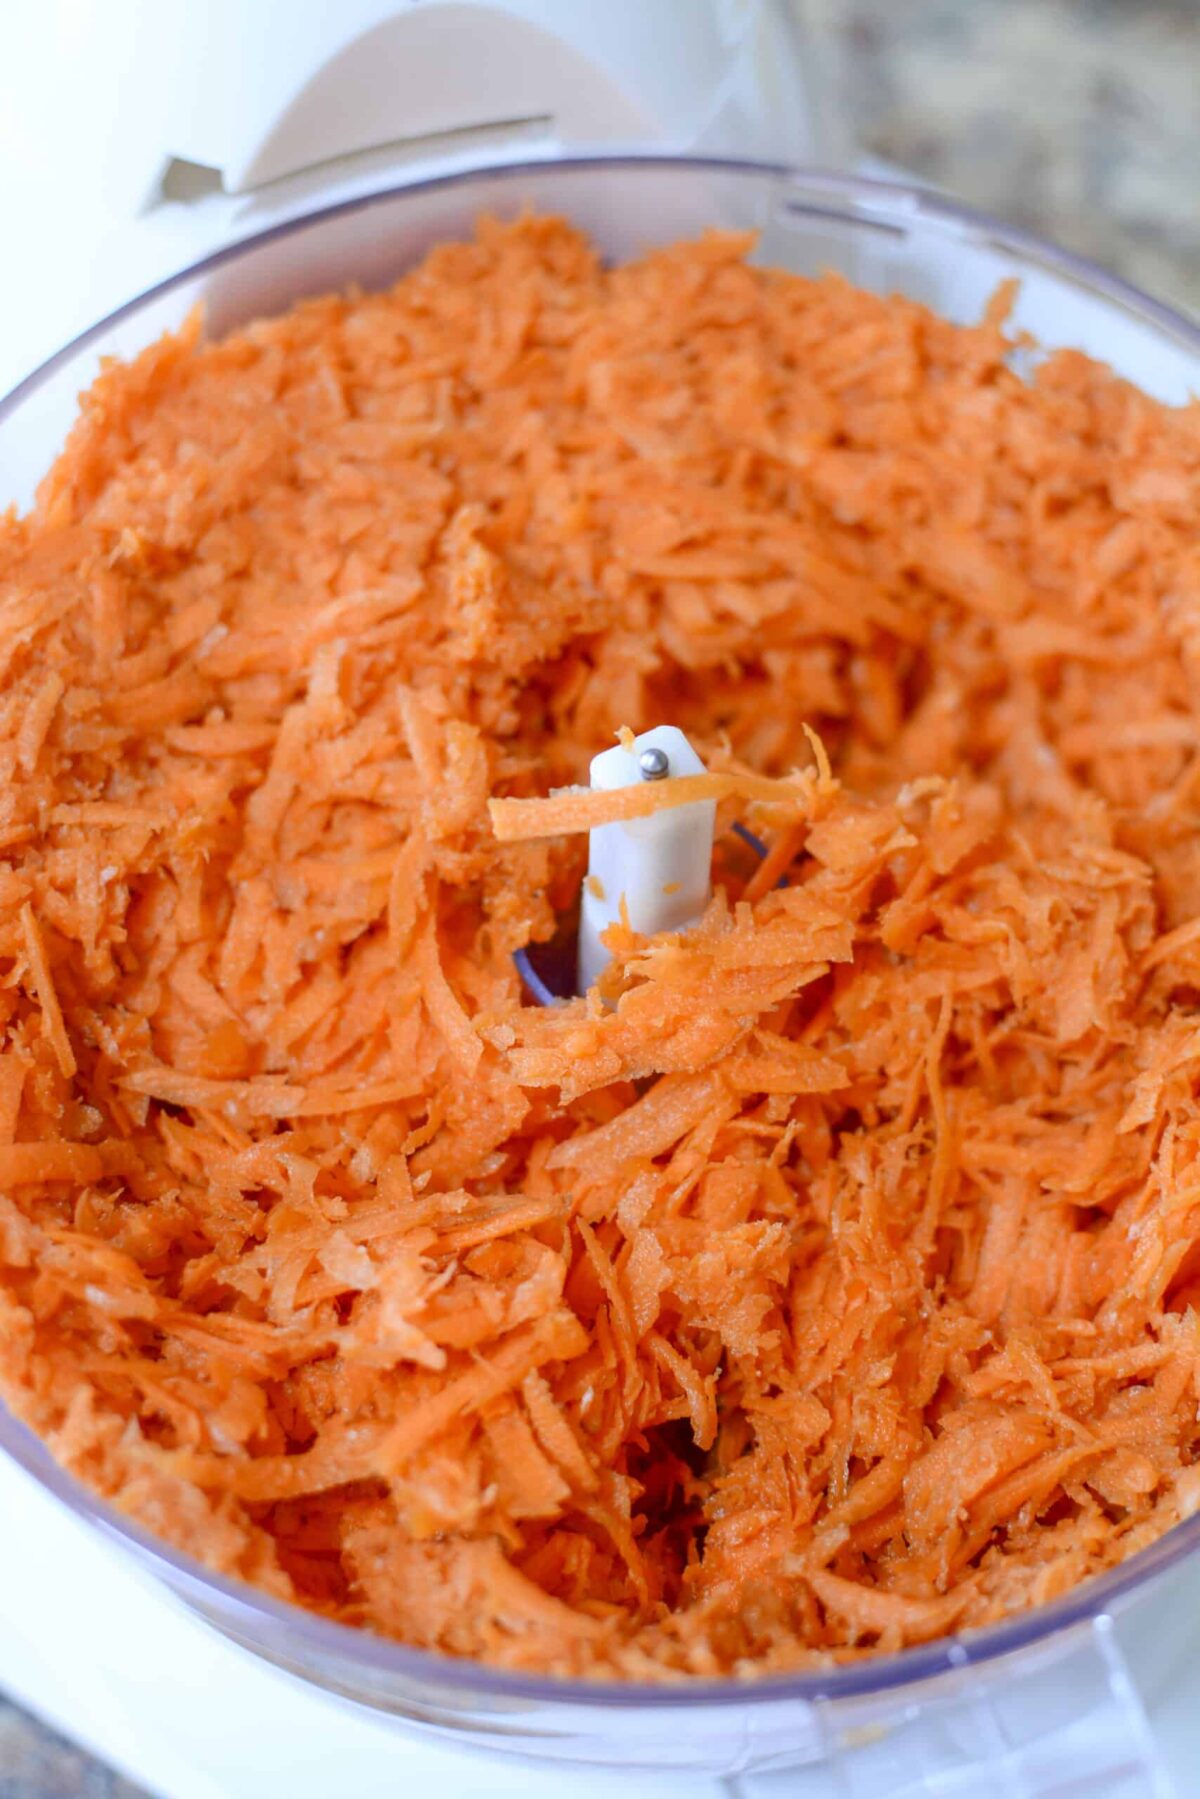 Shredded carrot in the food processor.